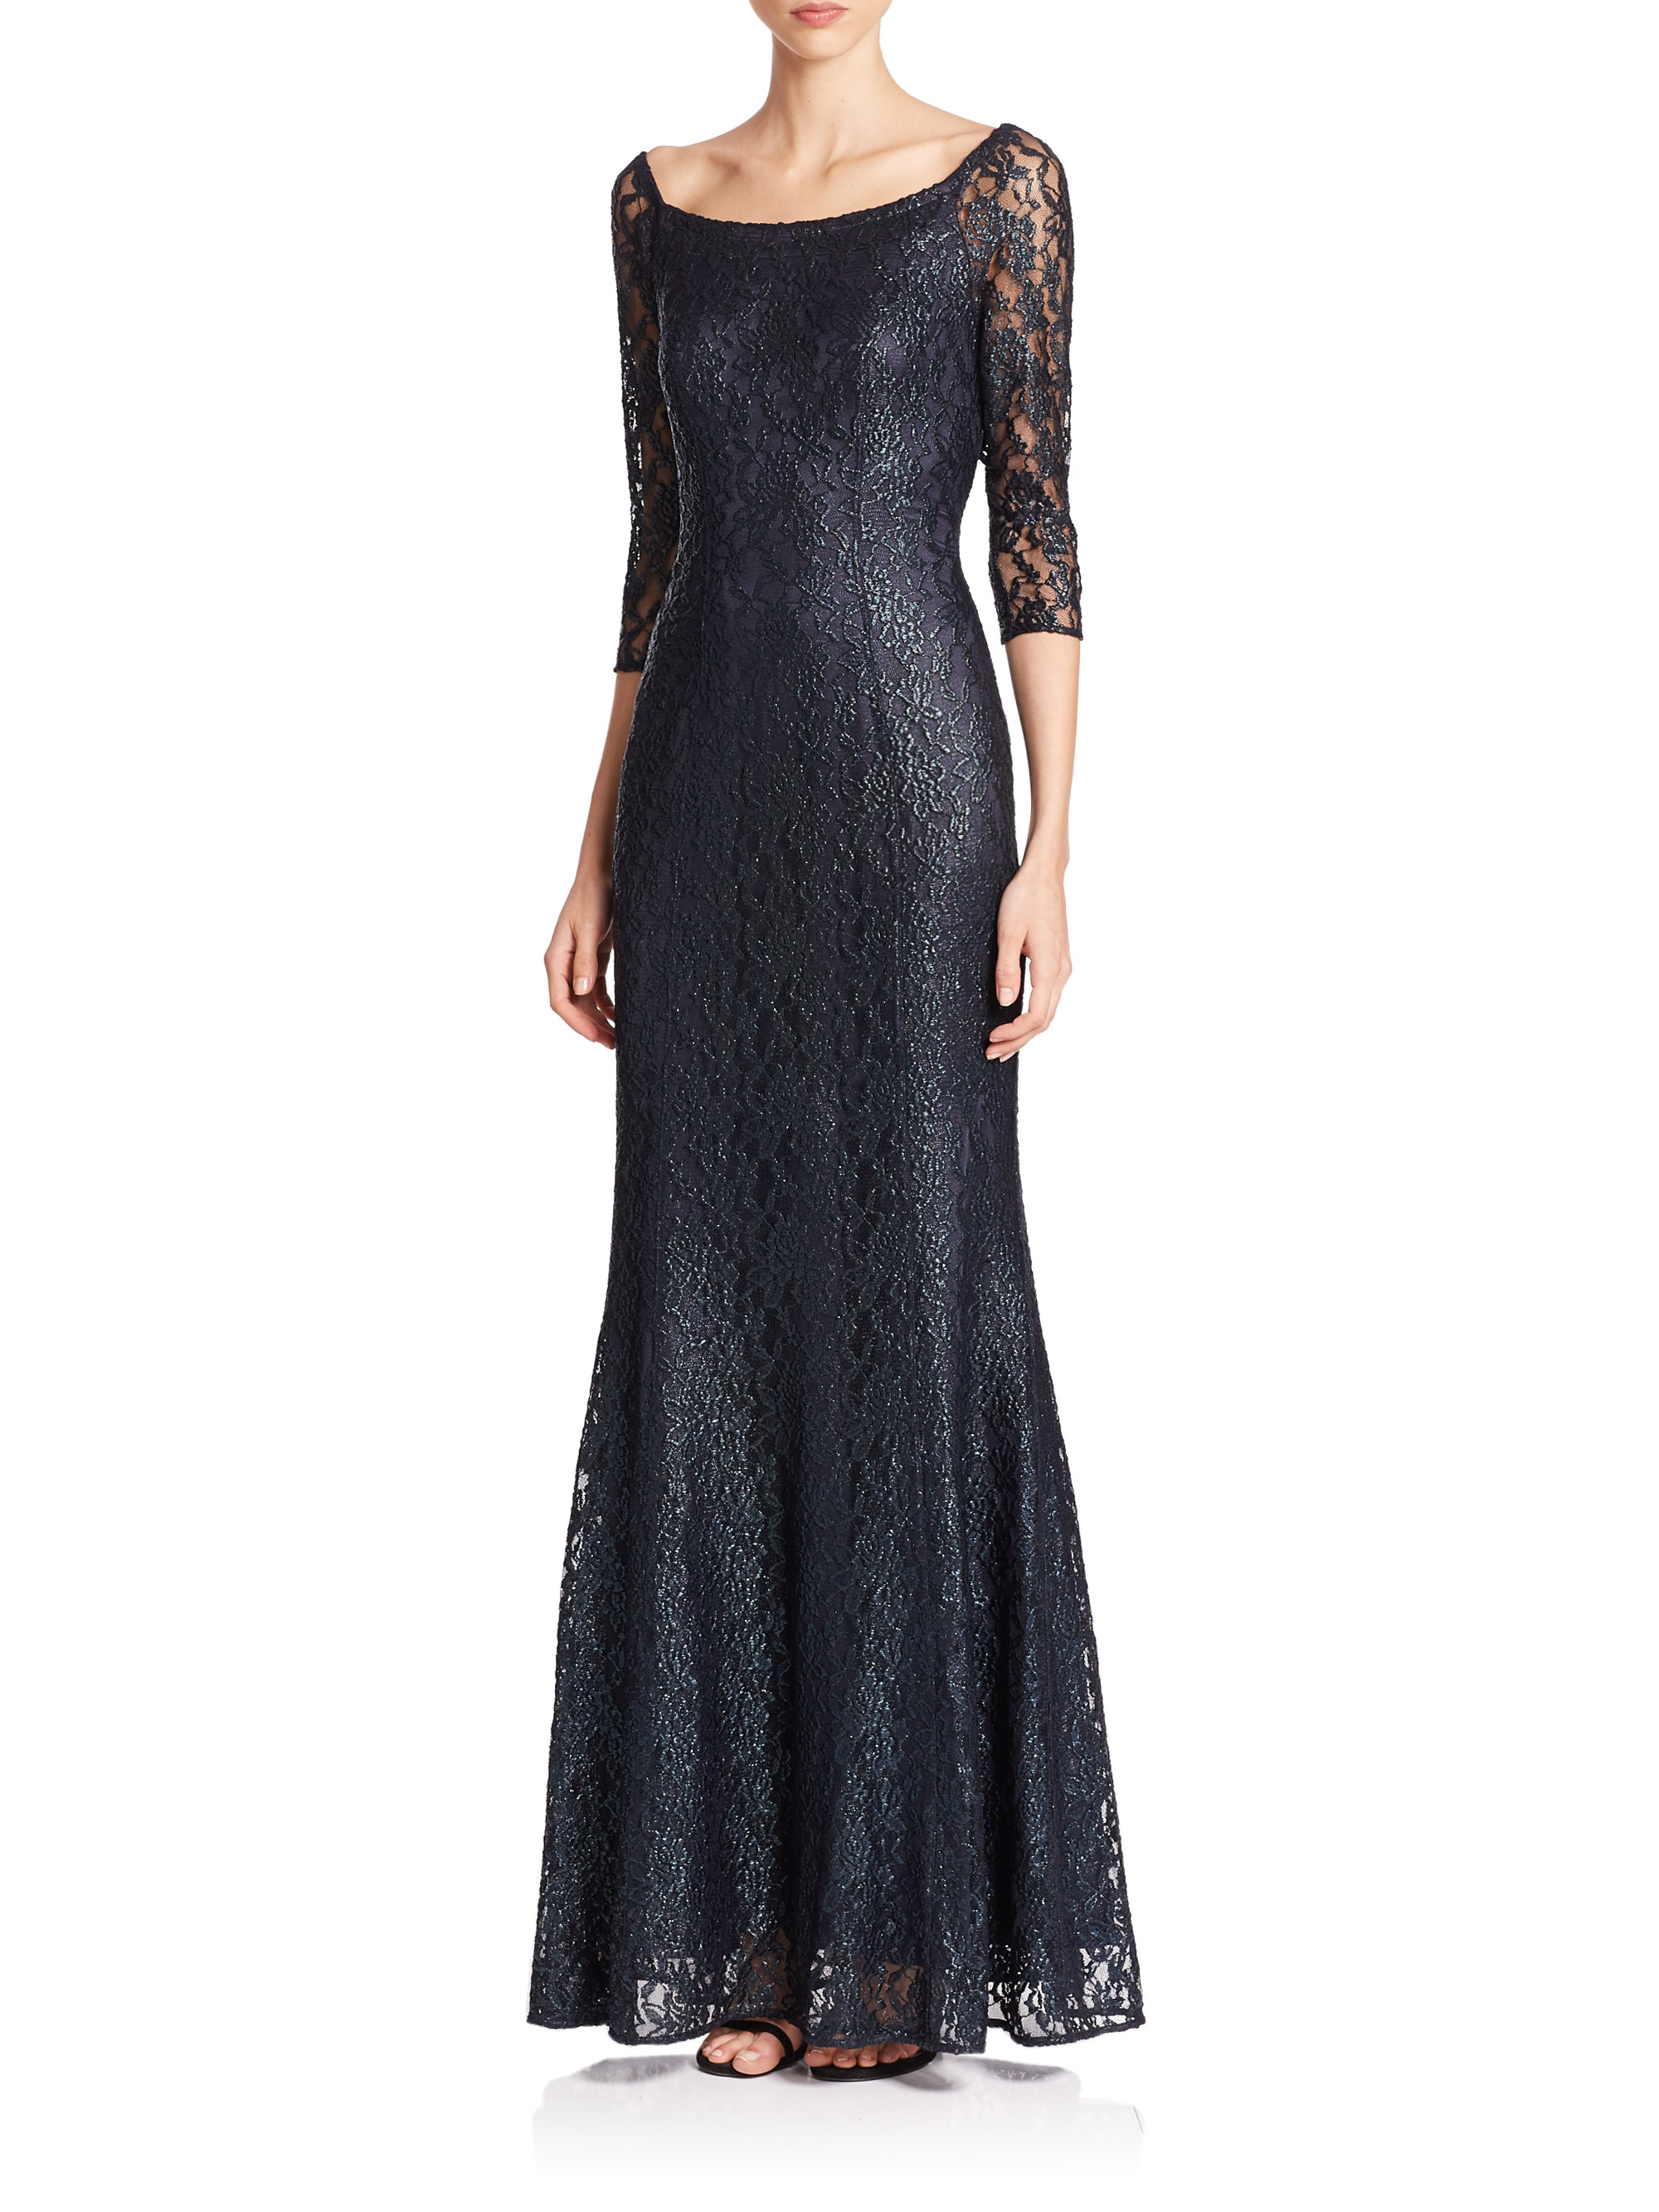 Kay unger Off-the-shoulder Floor-length Lace Gown in Blue | Lyst